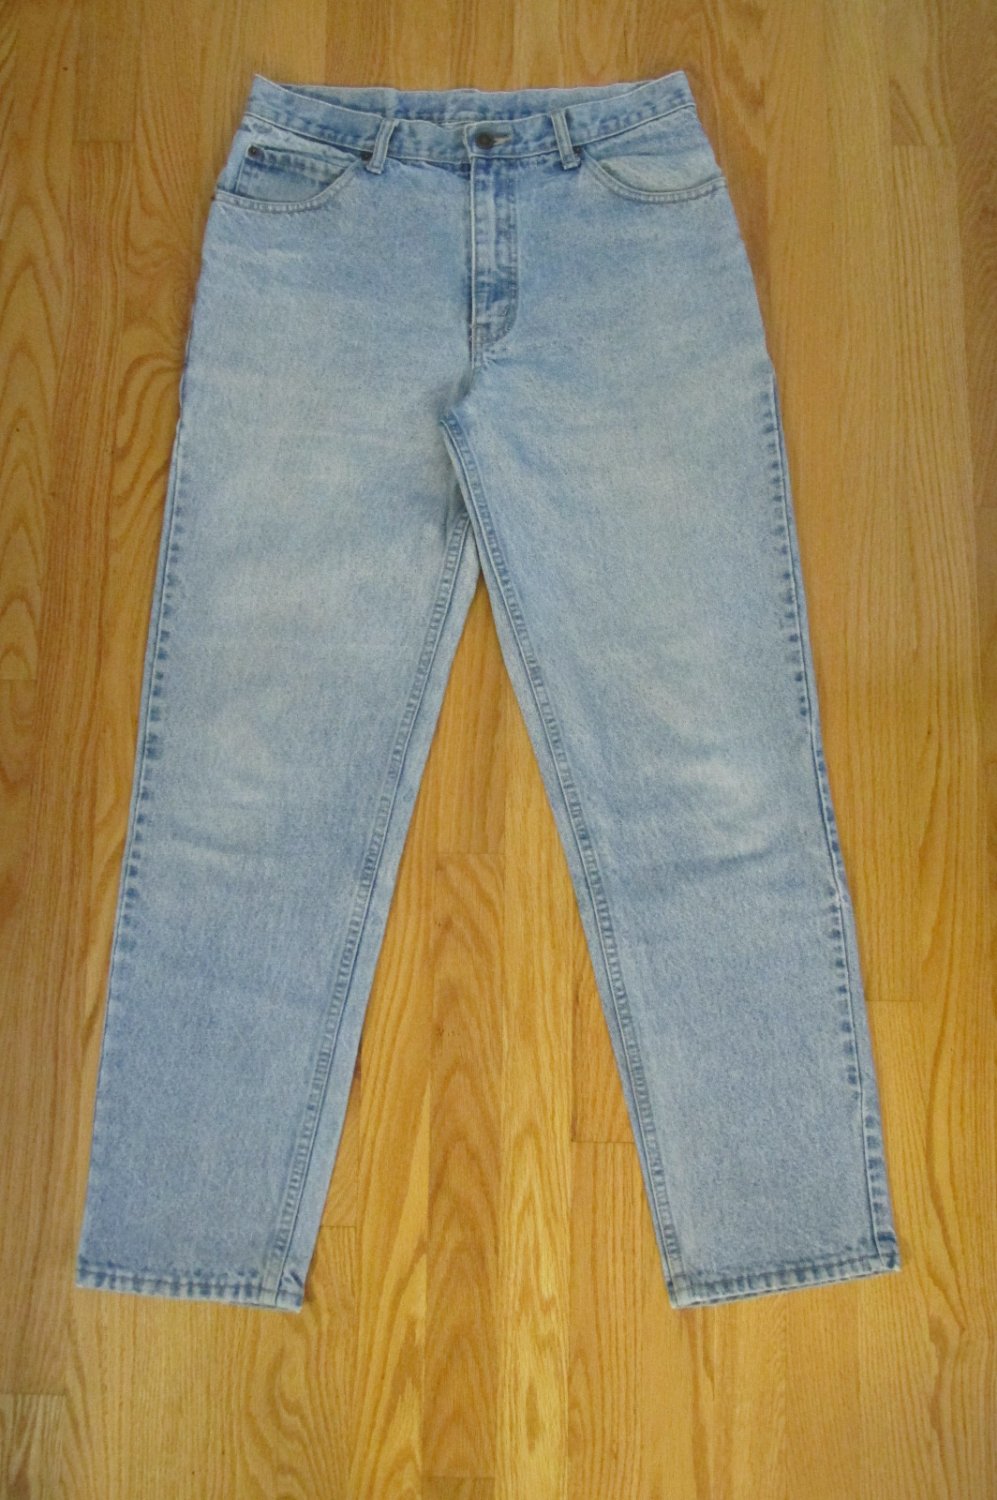 BRITTANIA MEN'S SIZE 32 X 30 JEANS LT BLUE STONE WASHED TAPERED LEG ...